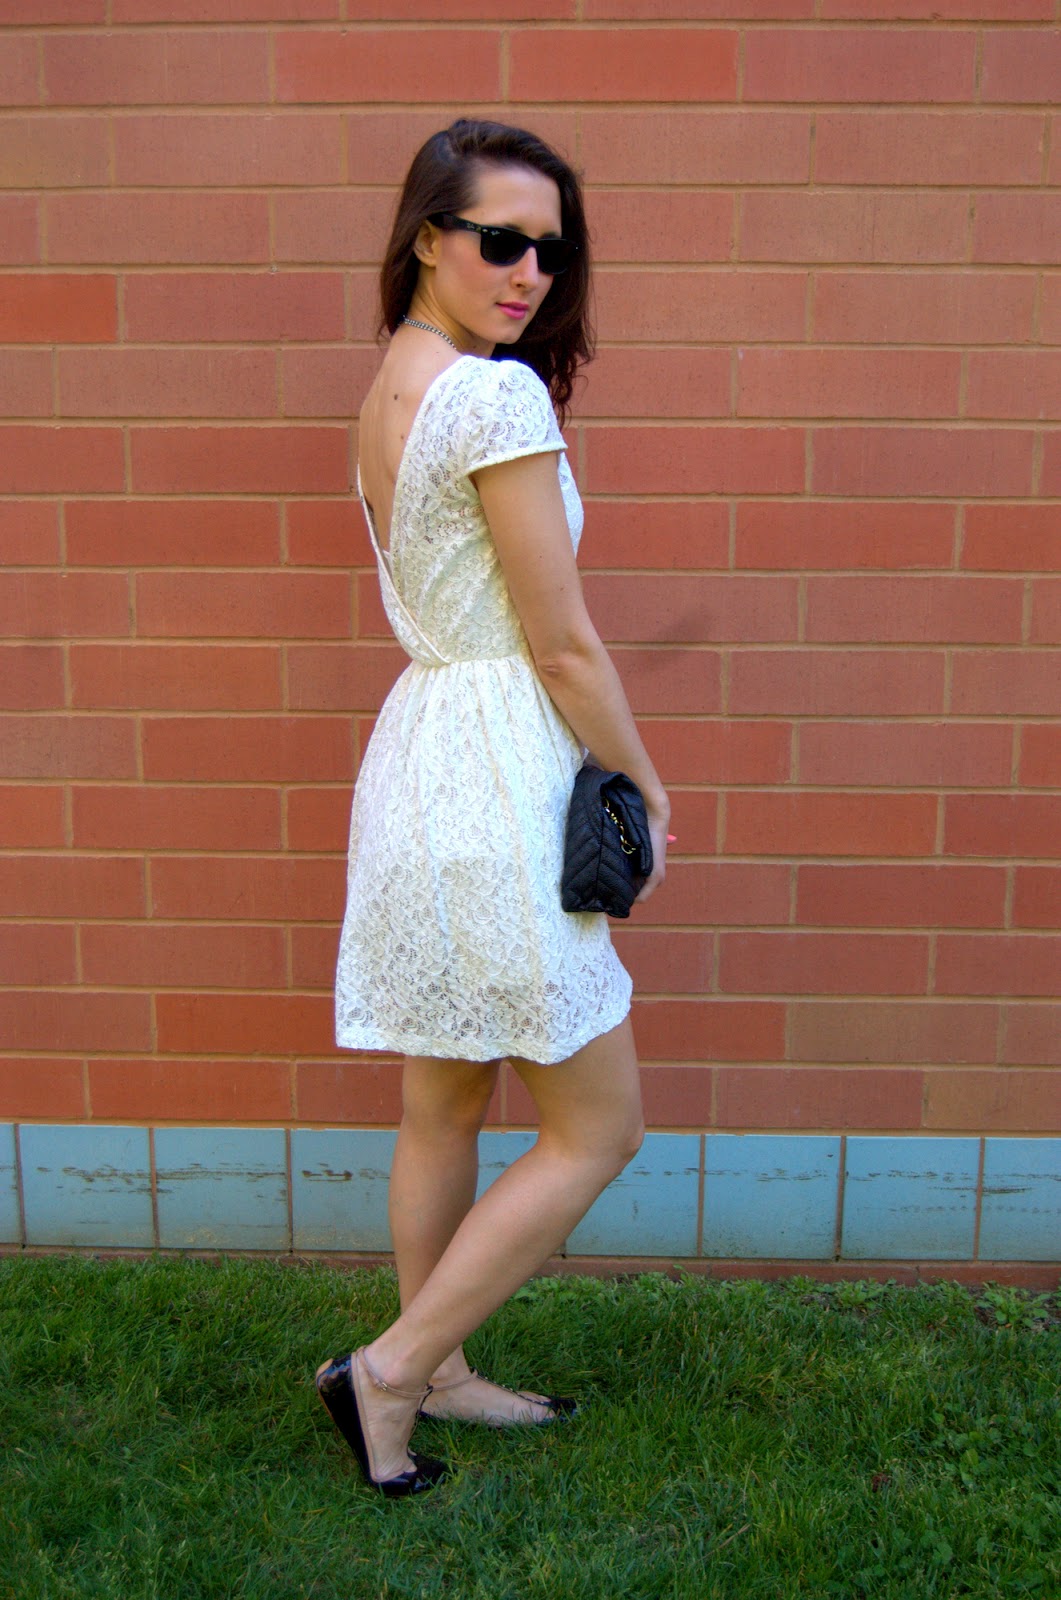 Fashion and Beats: Real: How to wear a white lace dress